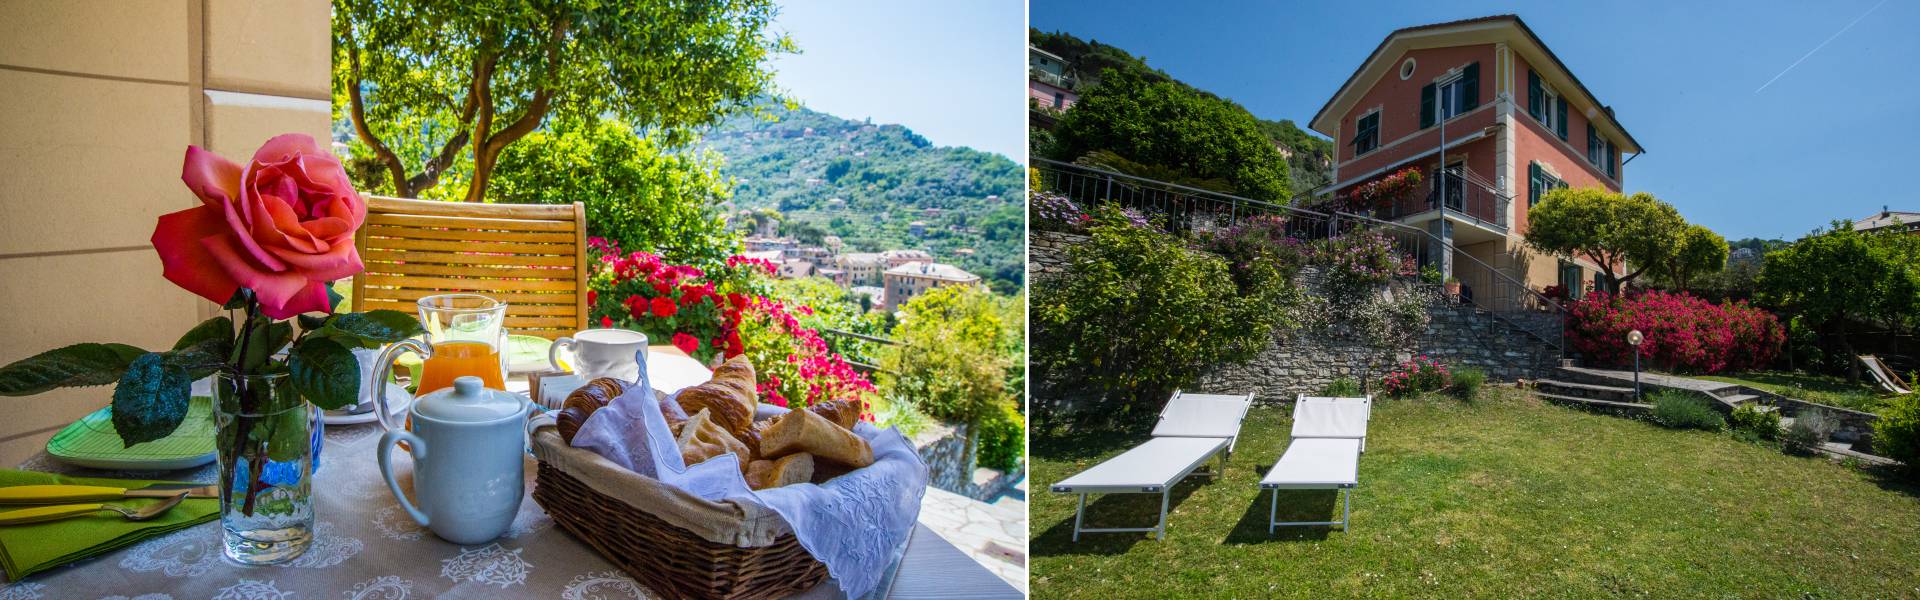 Le Tariffe - Bed and Breakfast Le Clementine, Camogli